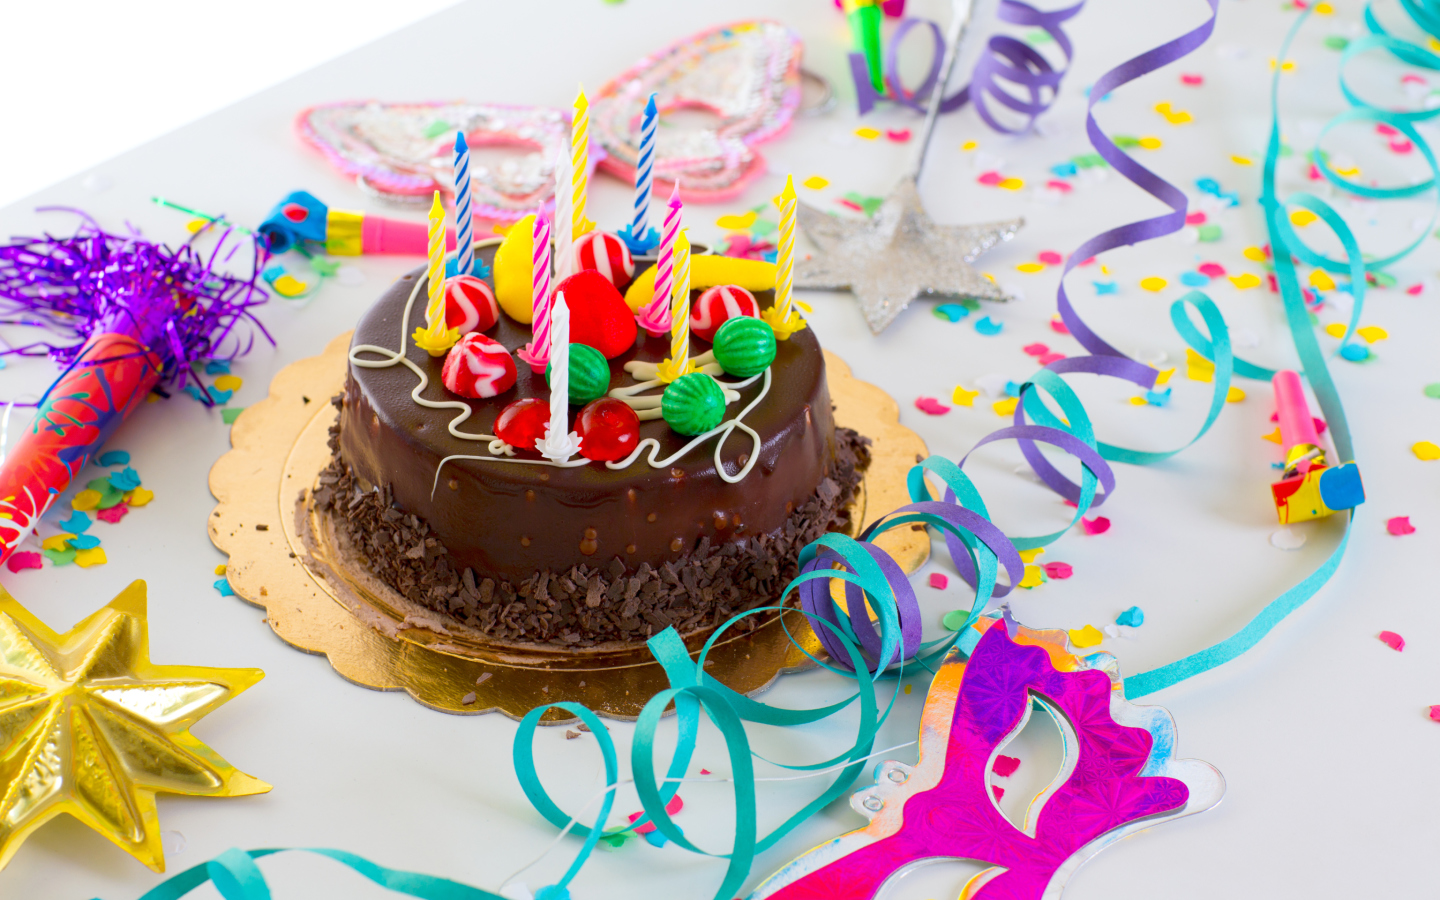 Das Birthday Cake With Candles Wallpaper 1440x900